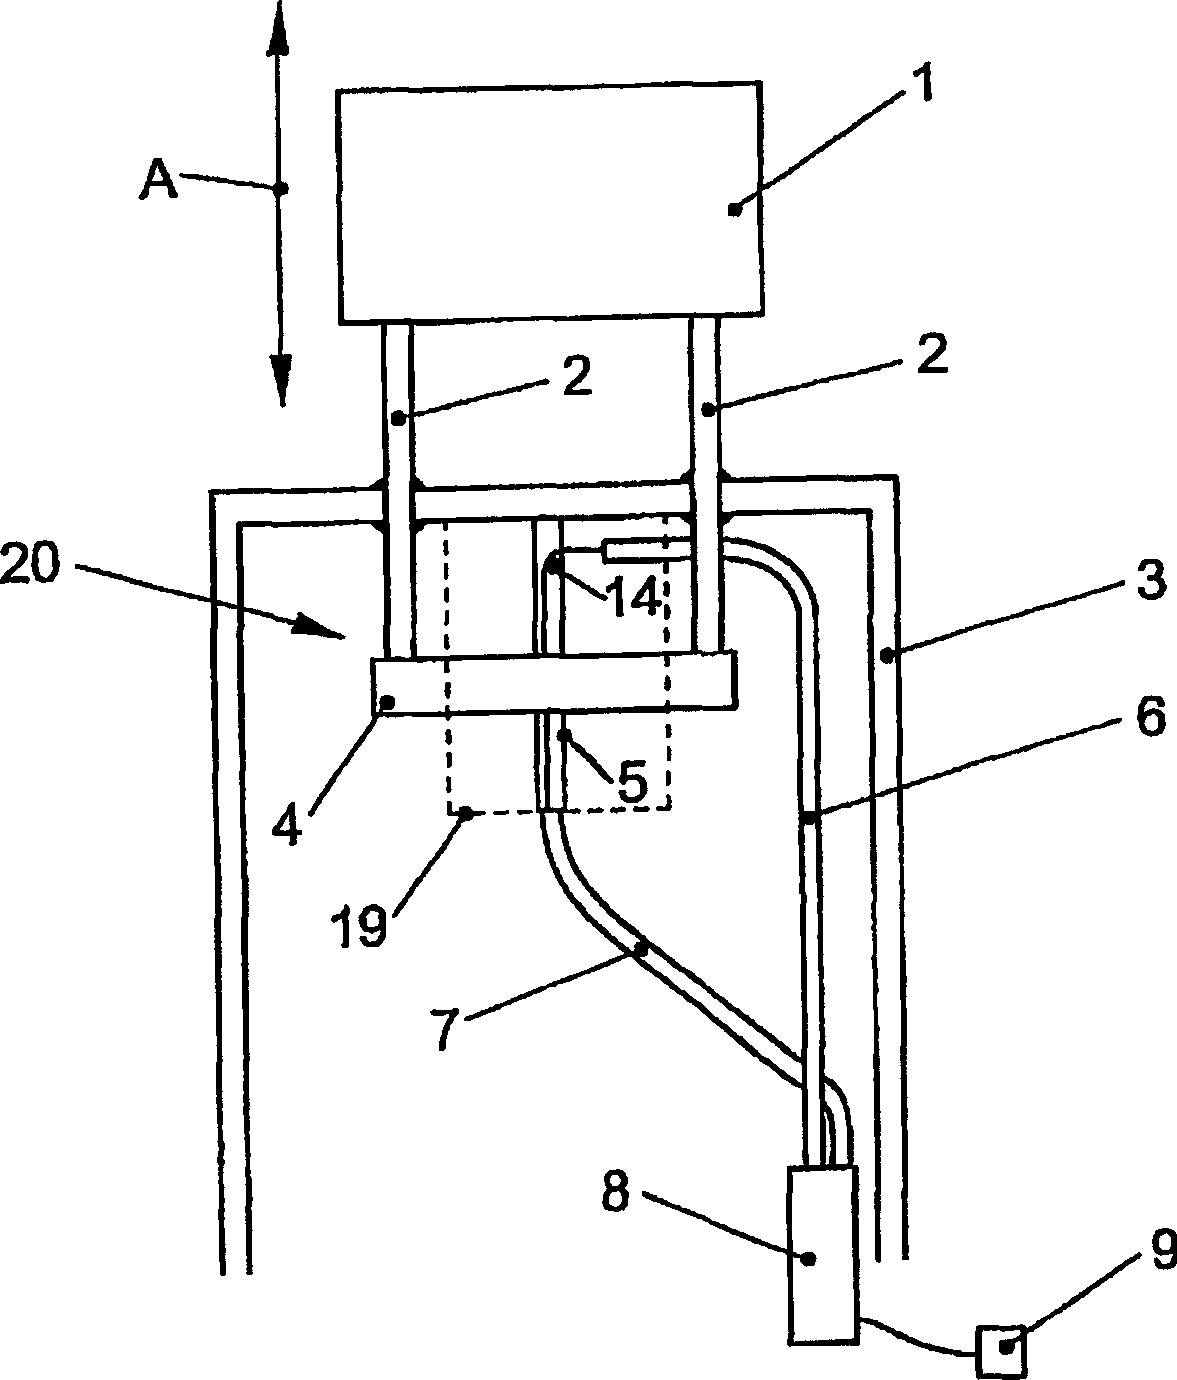 Adjuster device for height adjustment of a headrest